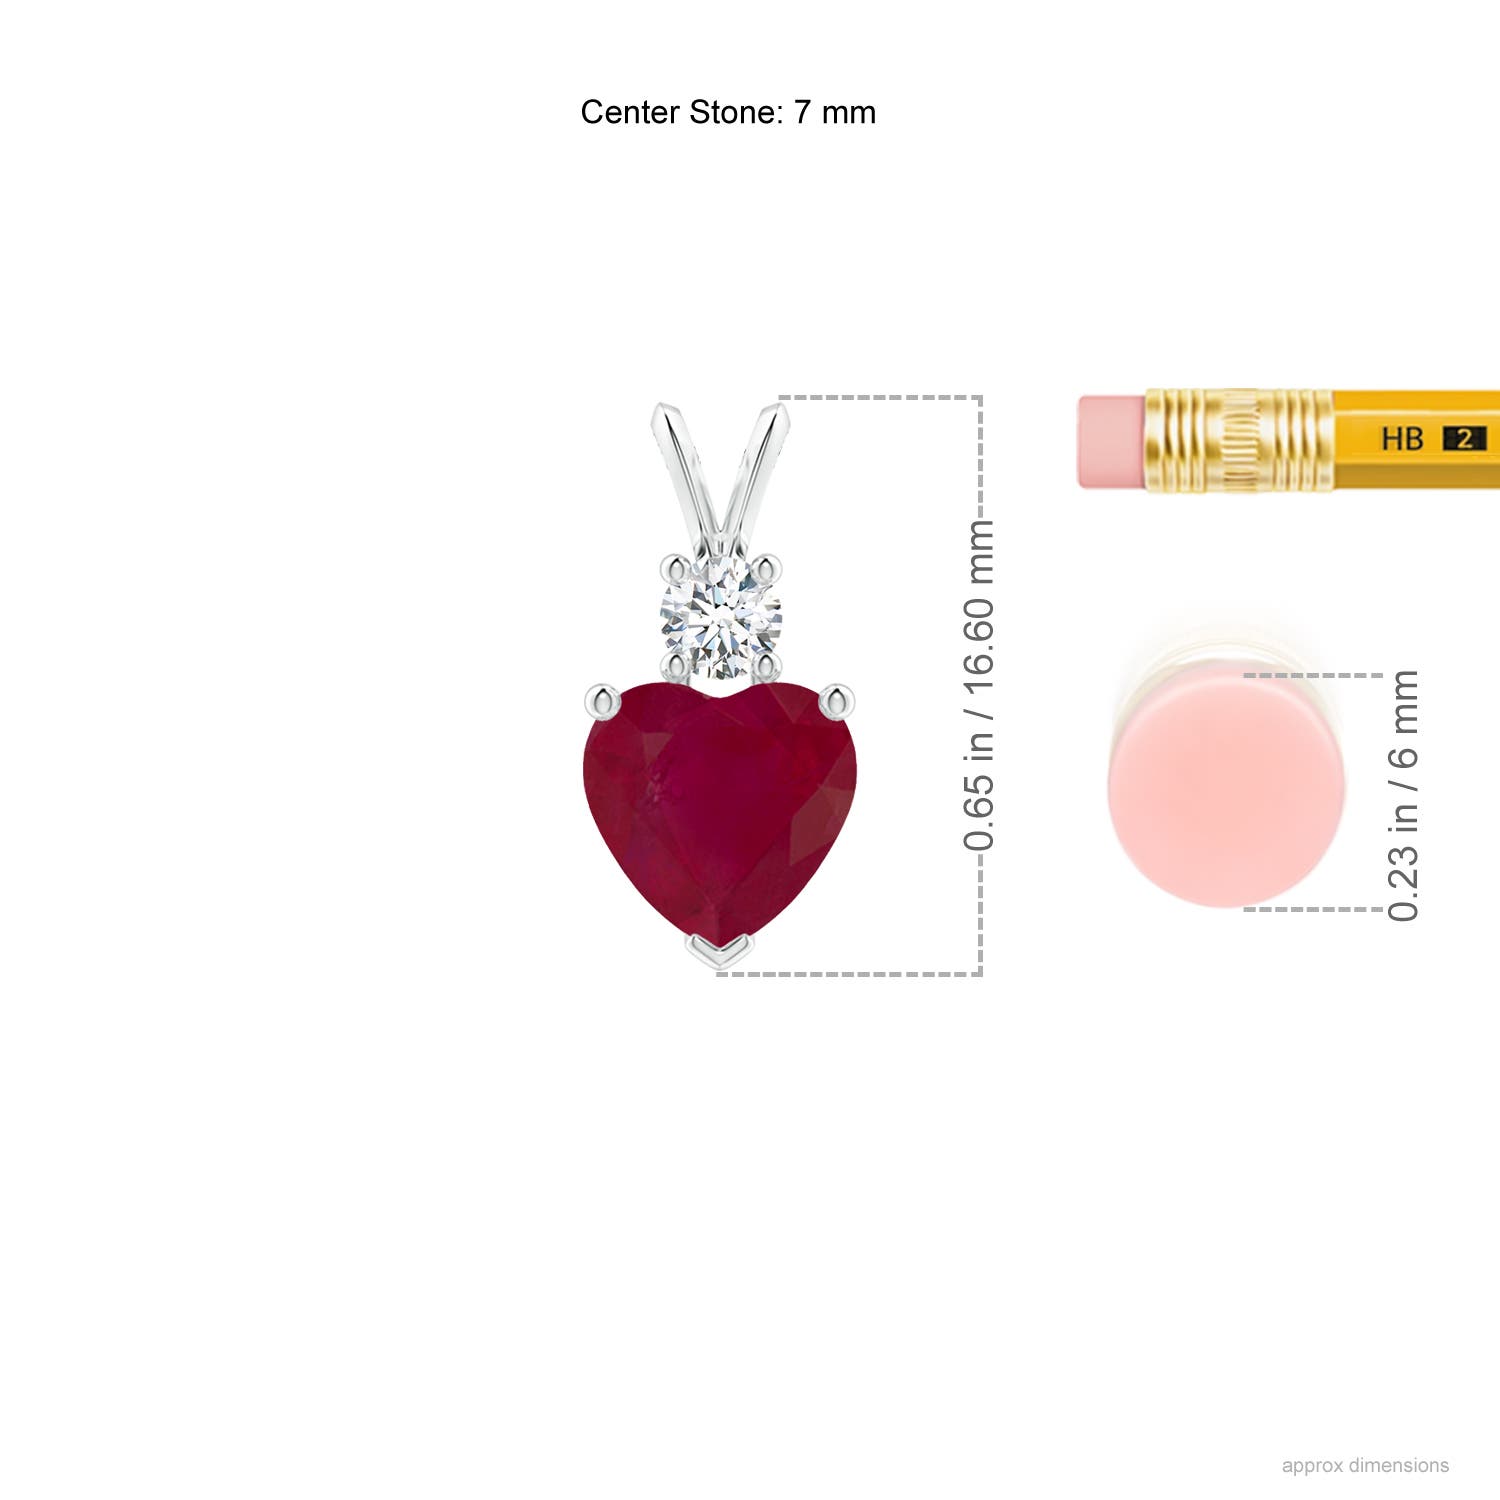 A - Ruby / 1.8 CT / 14 KT White Gold